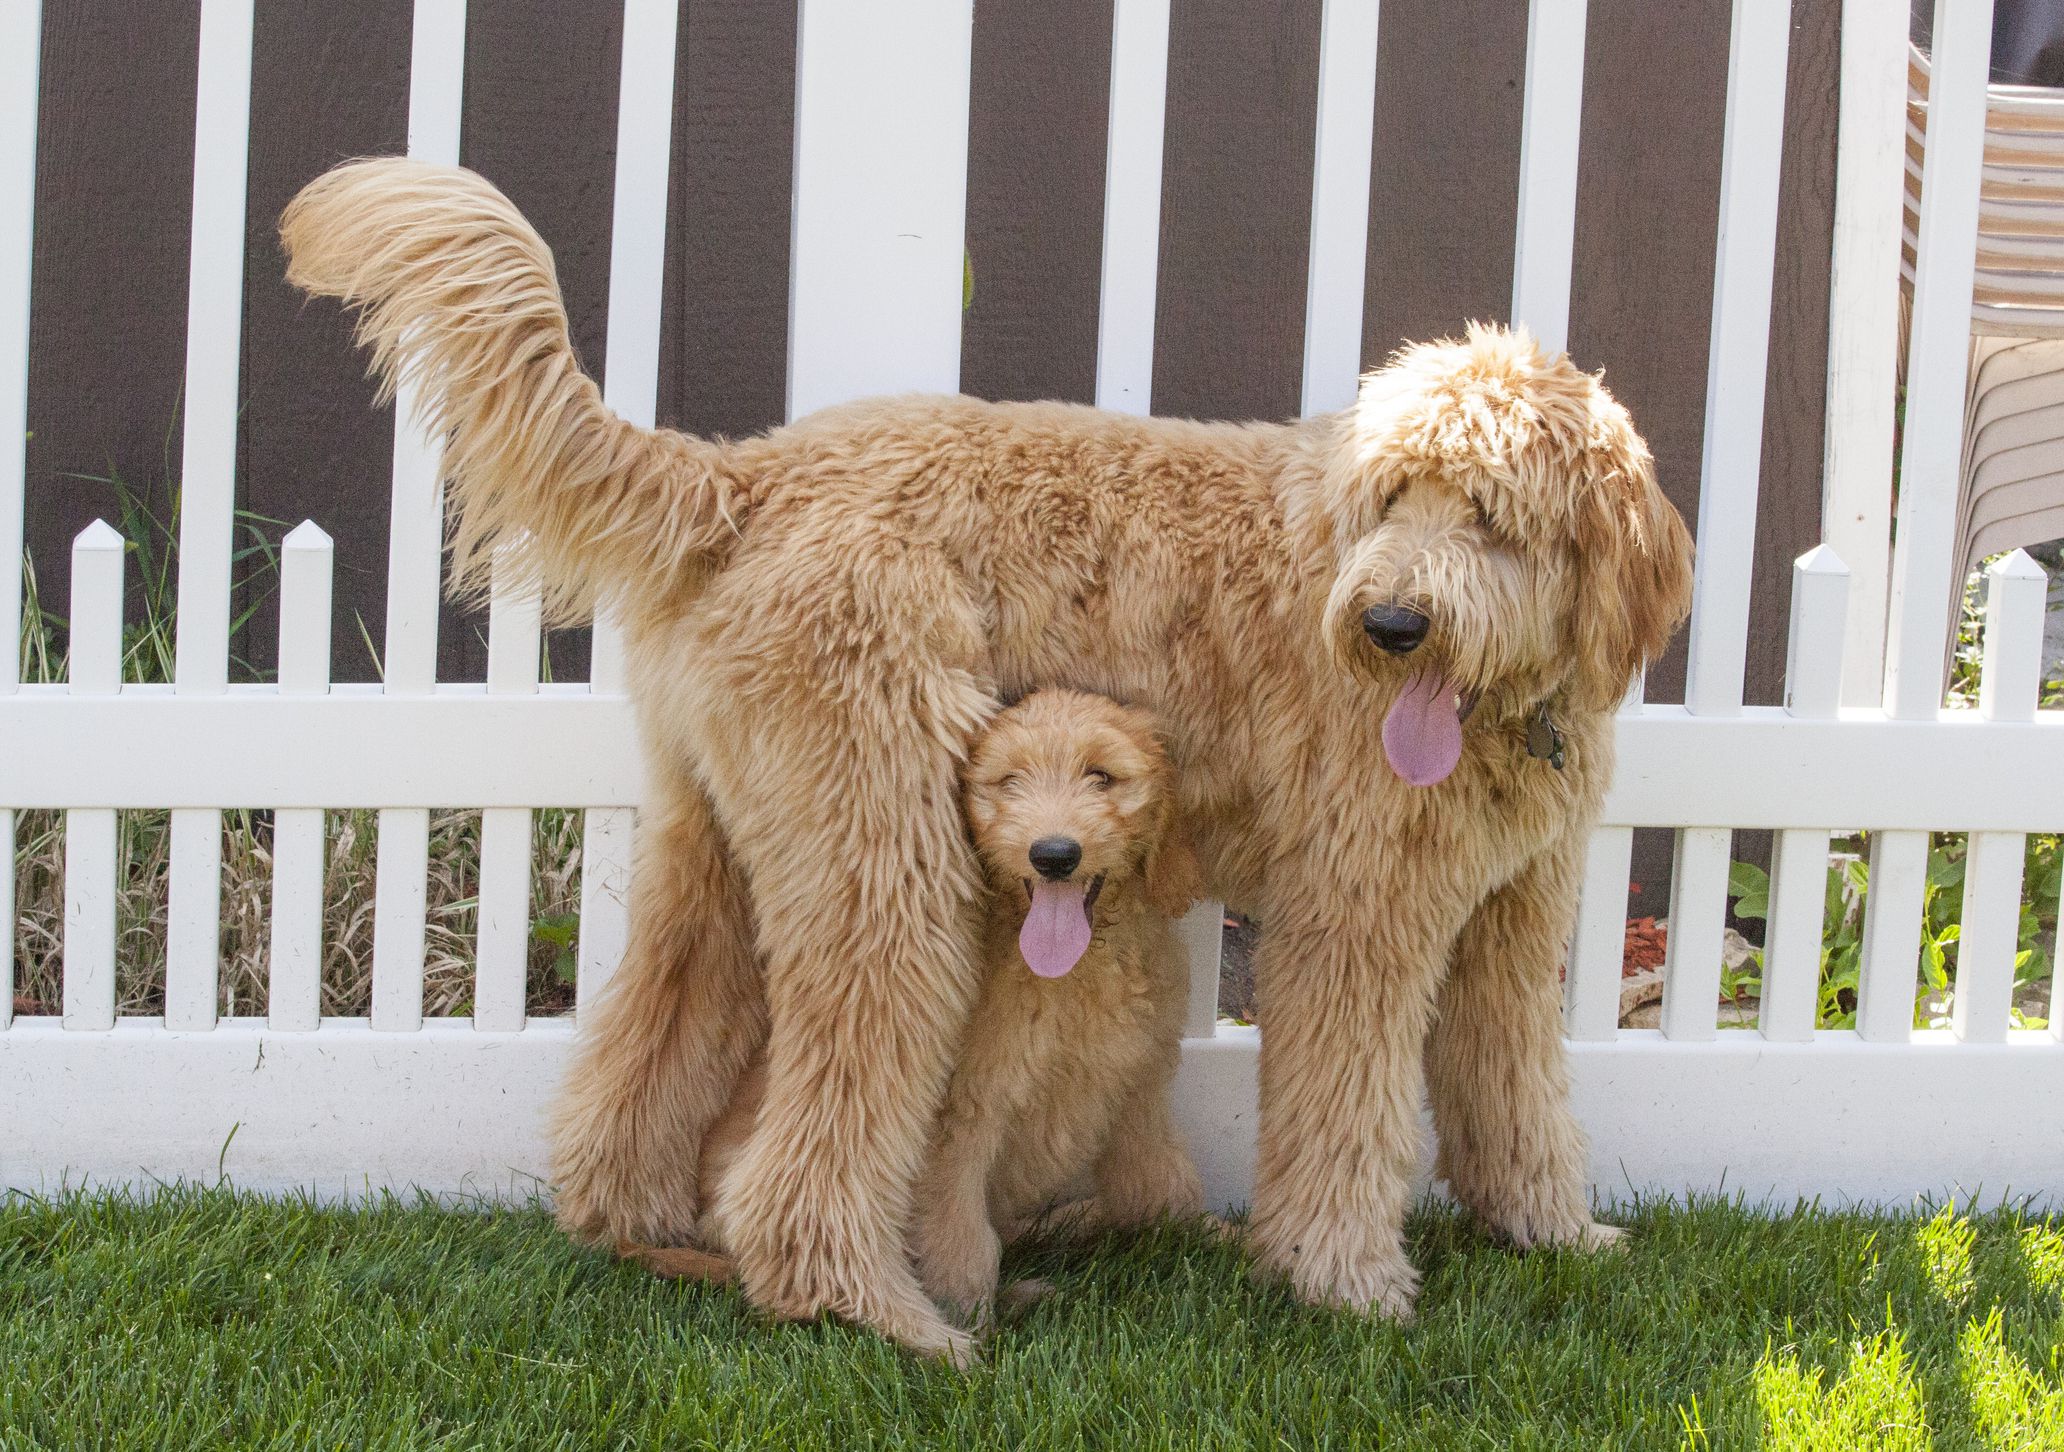 How Much Is a Goldendoodle Dog?